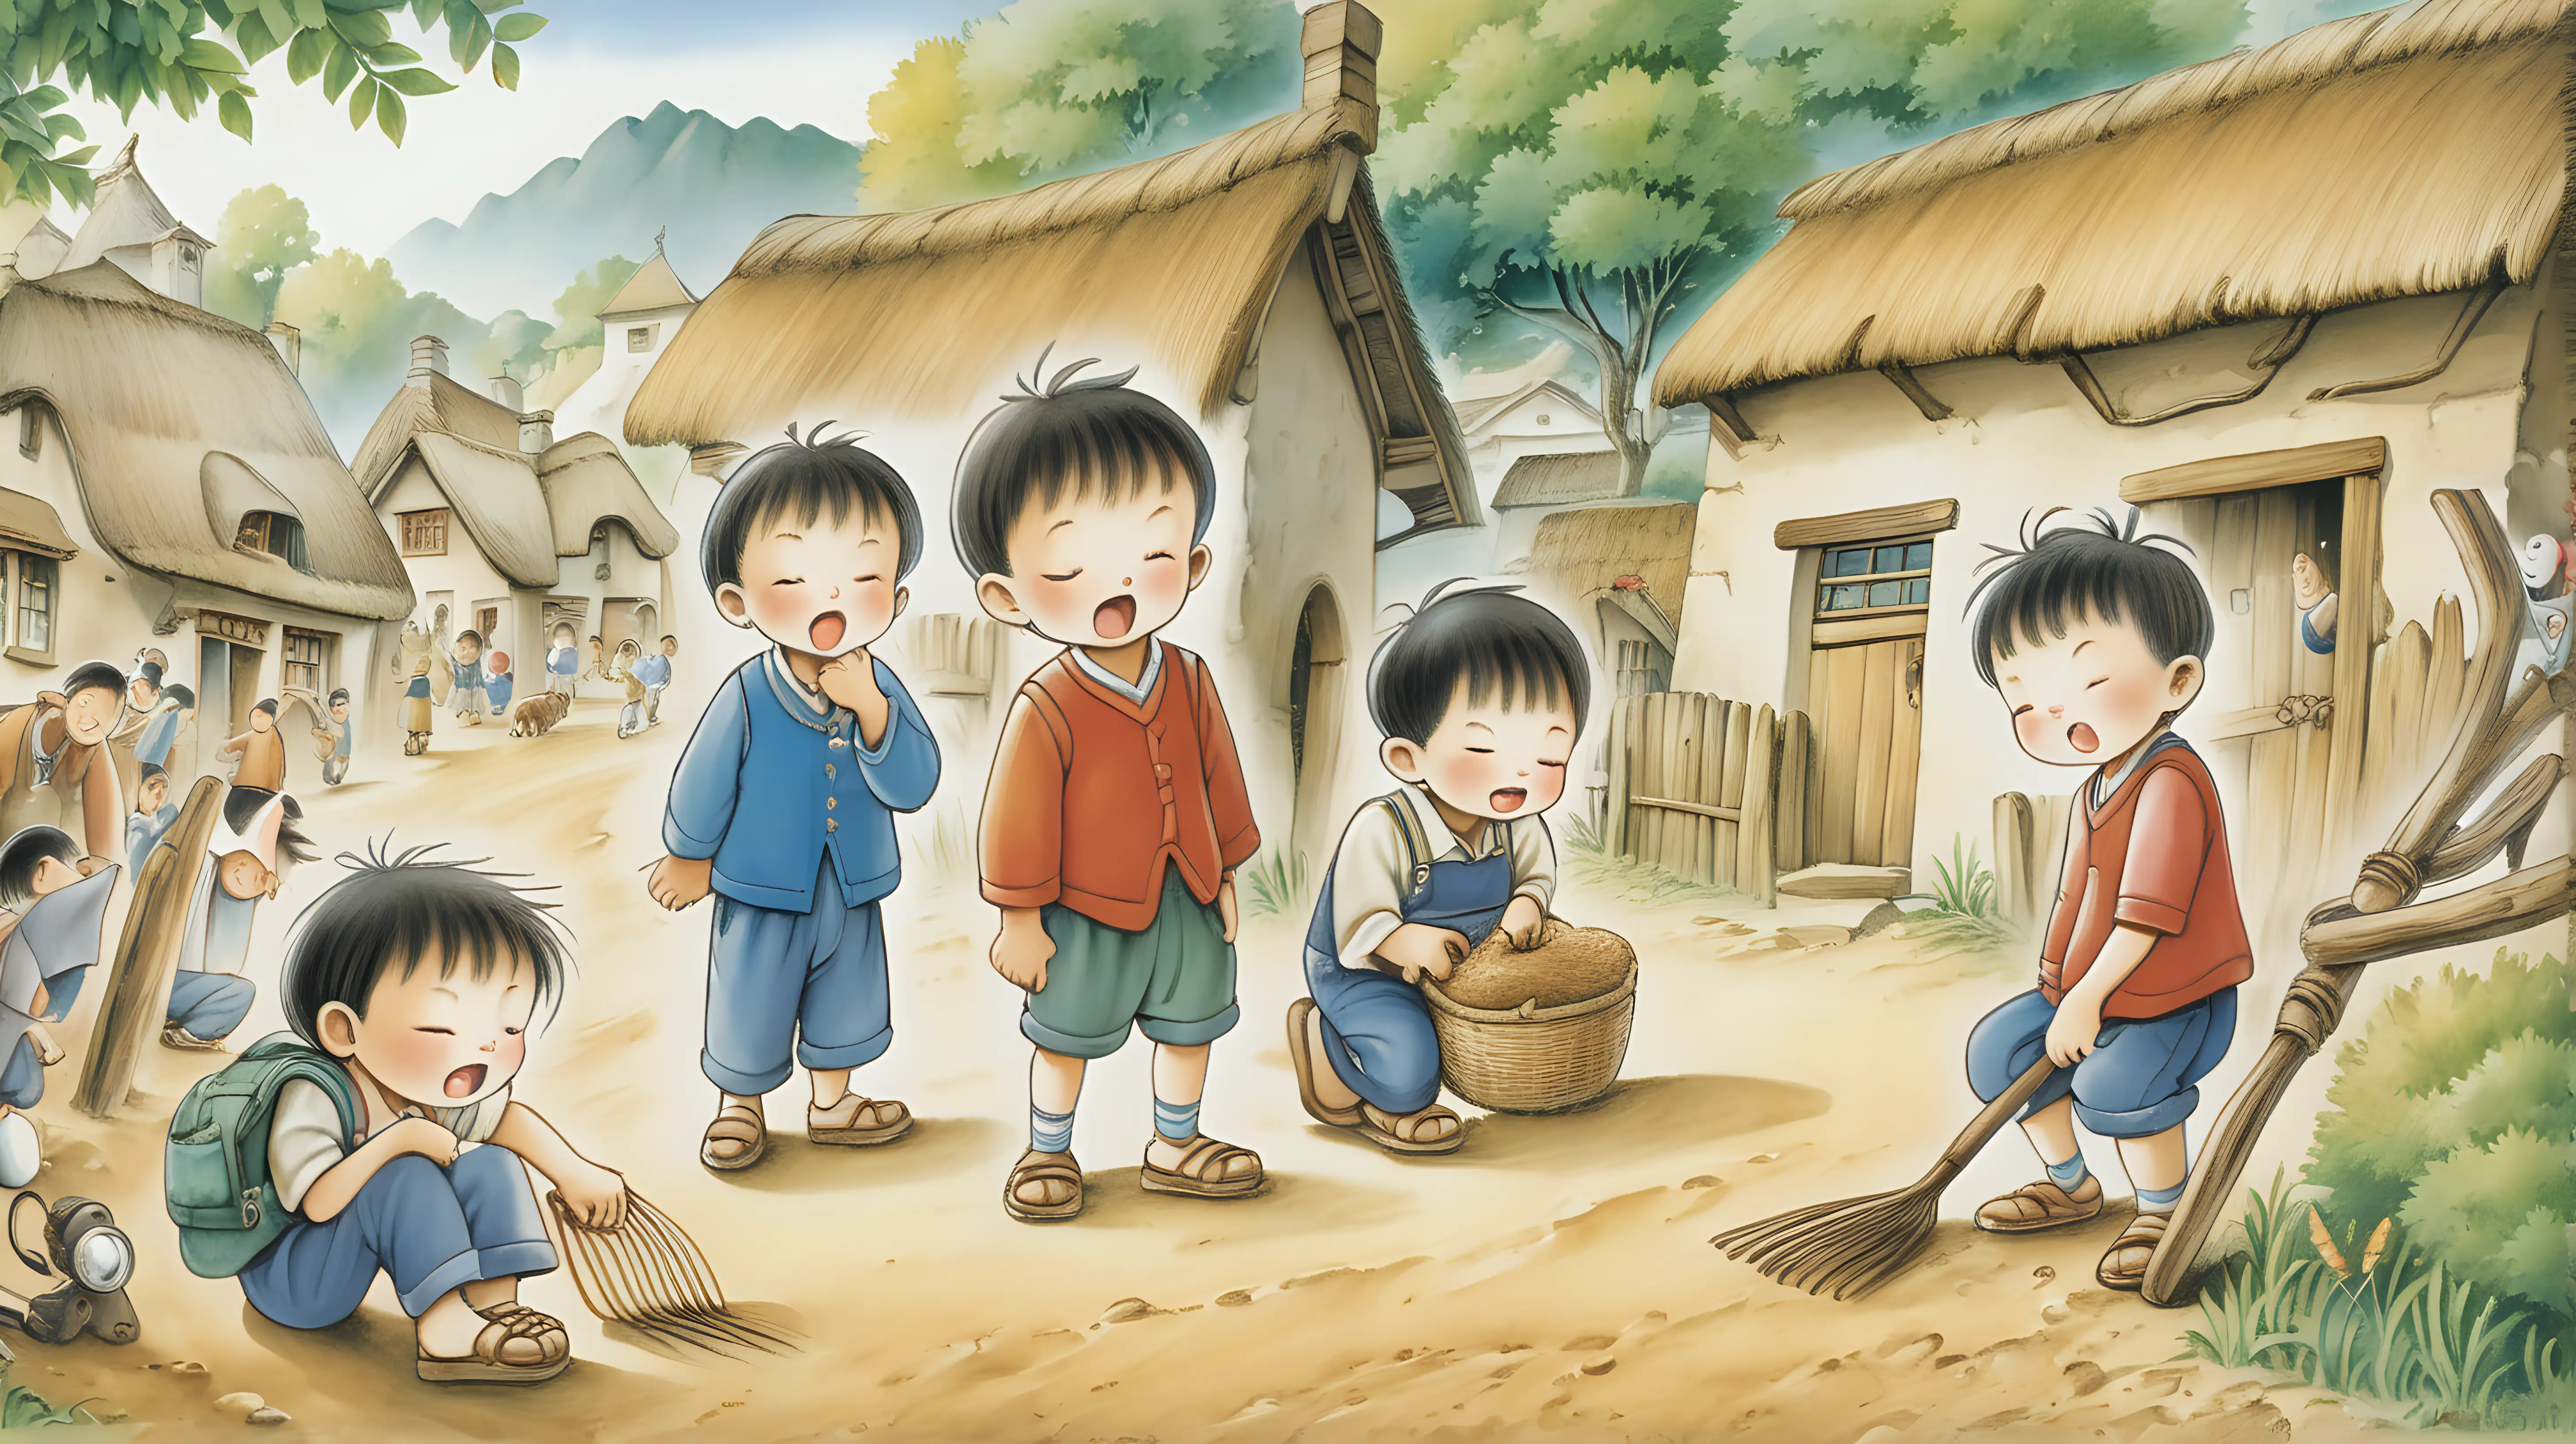 Playful Village Boy Delights in Picture Book Style